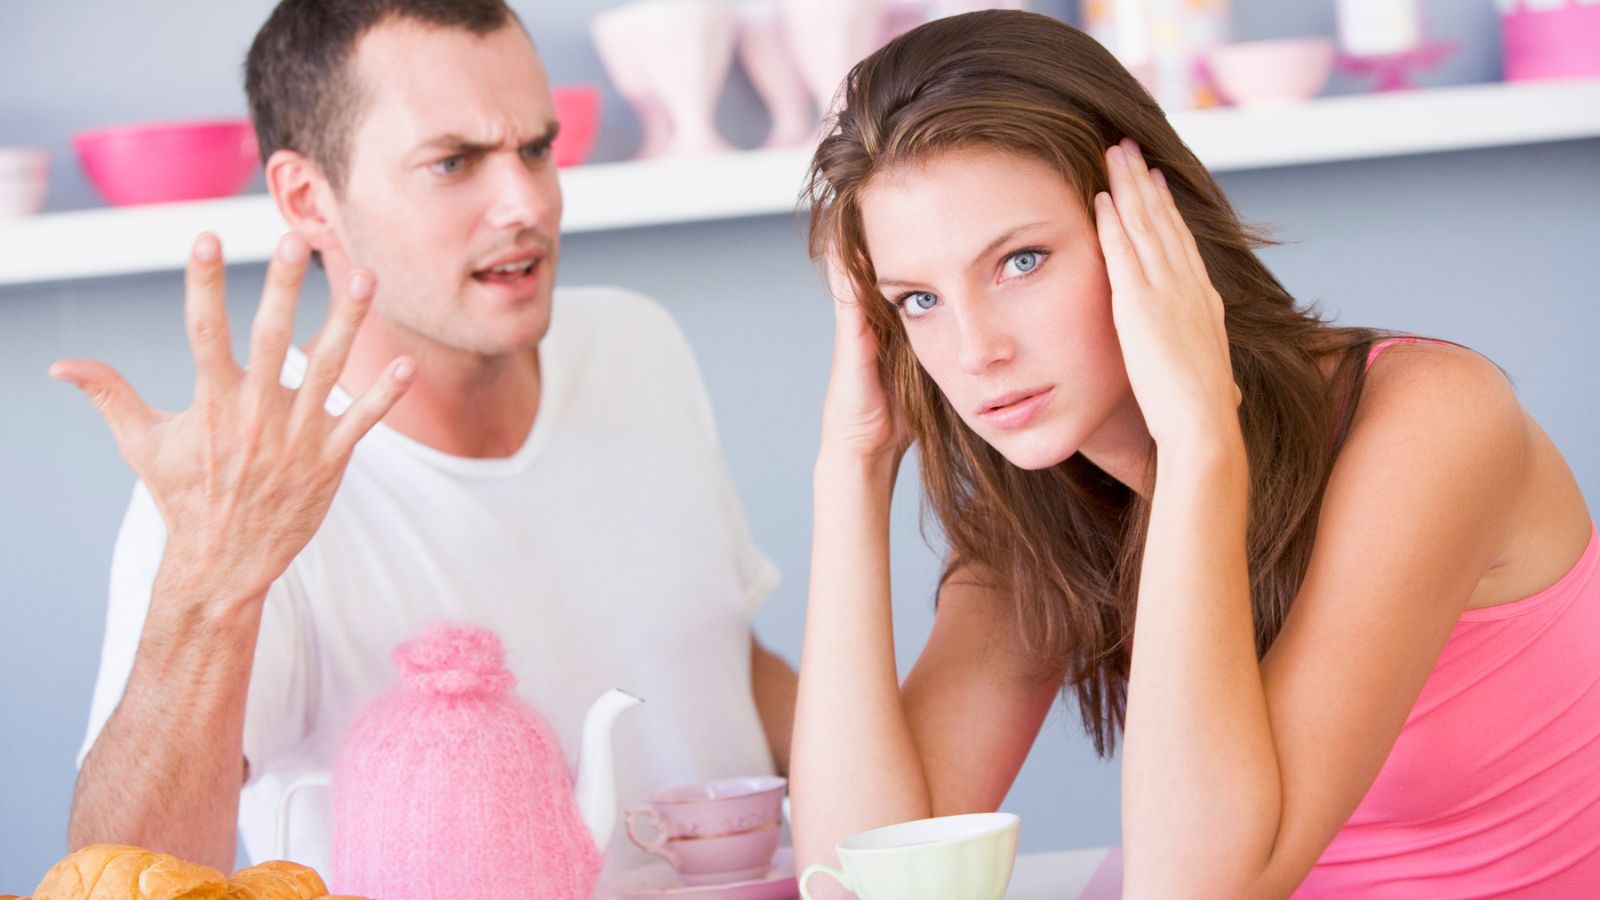 Vegan Dishes for Disapproving Husband: Right or Wrong?